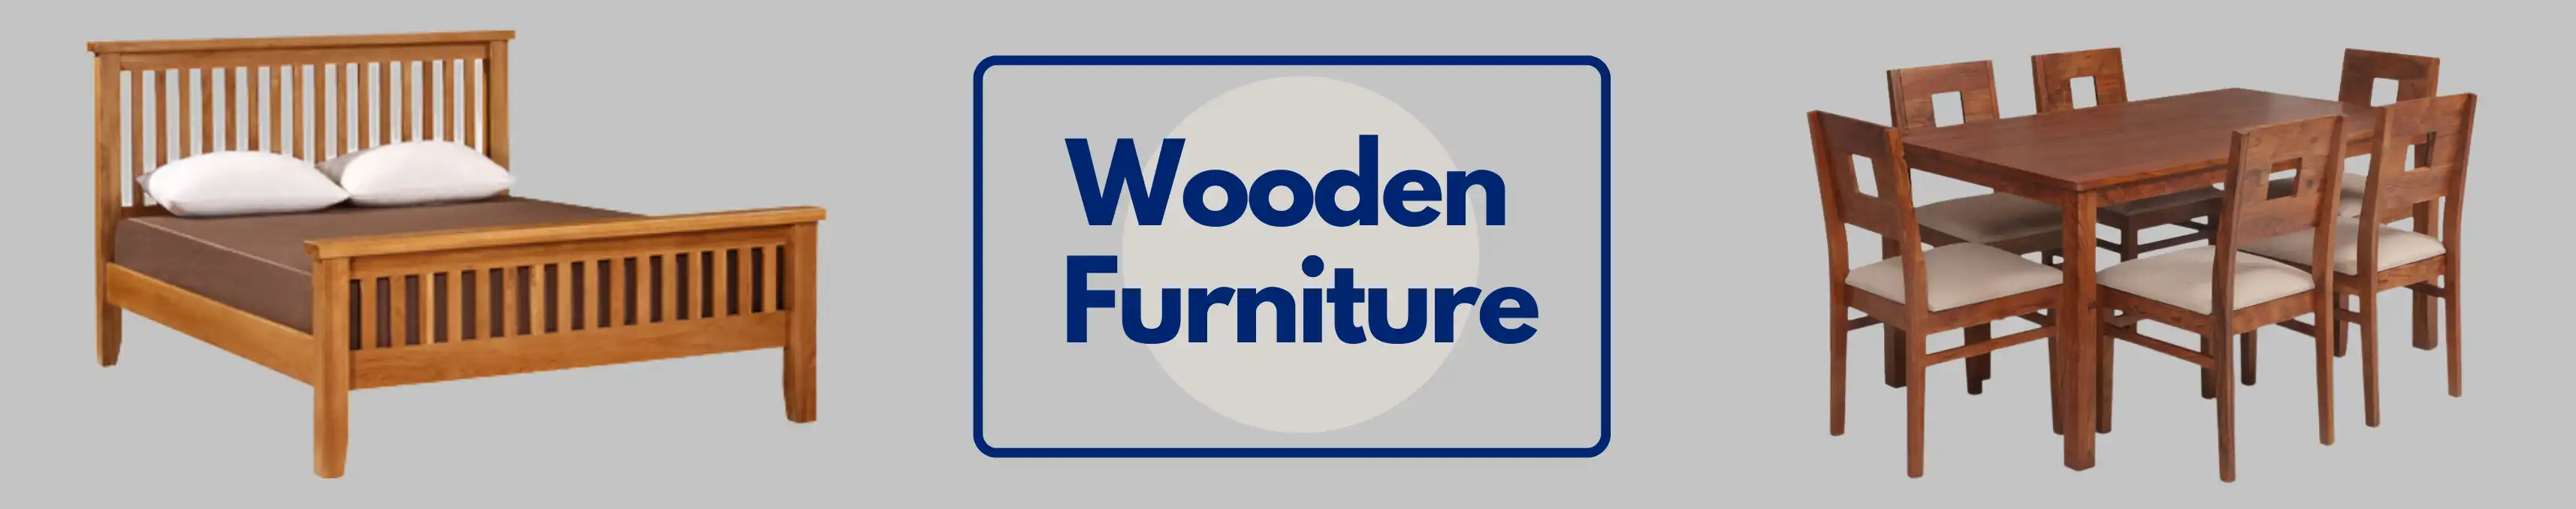 Customize Furniture Banner PC - Woods Royal